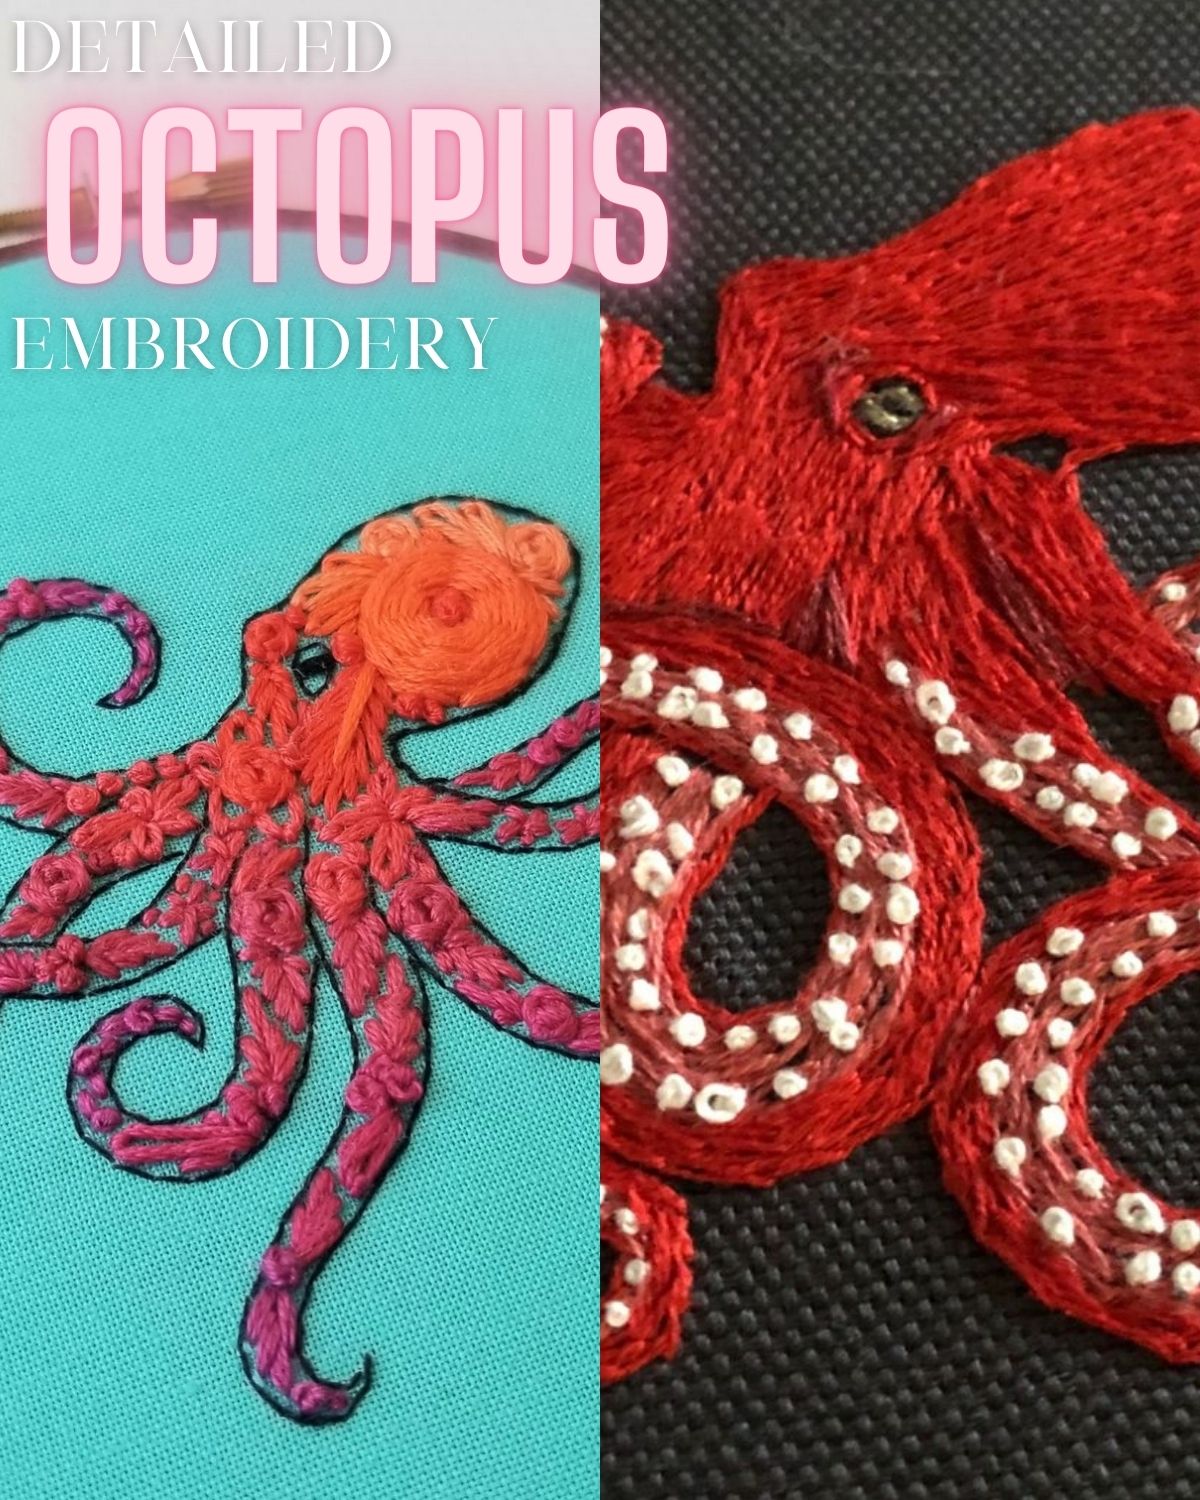 Extremely detailed octopus artwork.